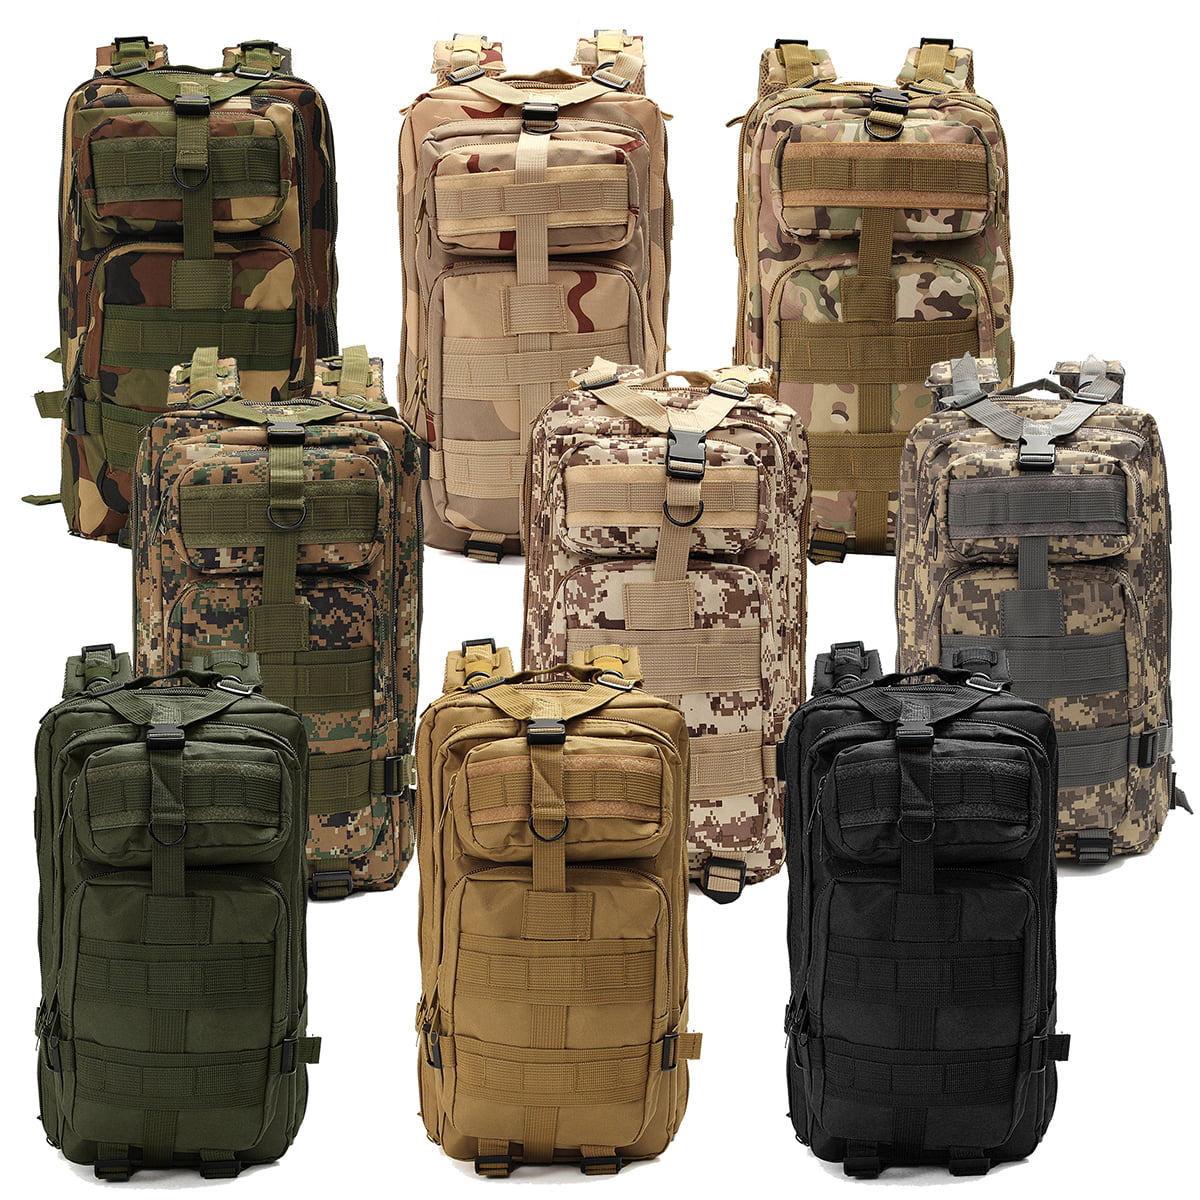 OLEADER Tactical Backpack Military Army Backpack for Hunting/Hiking/Traveling/Outdoor Middle size 30L 